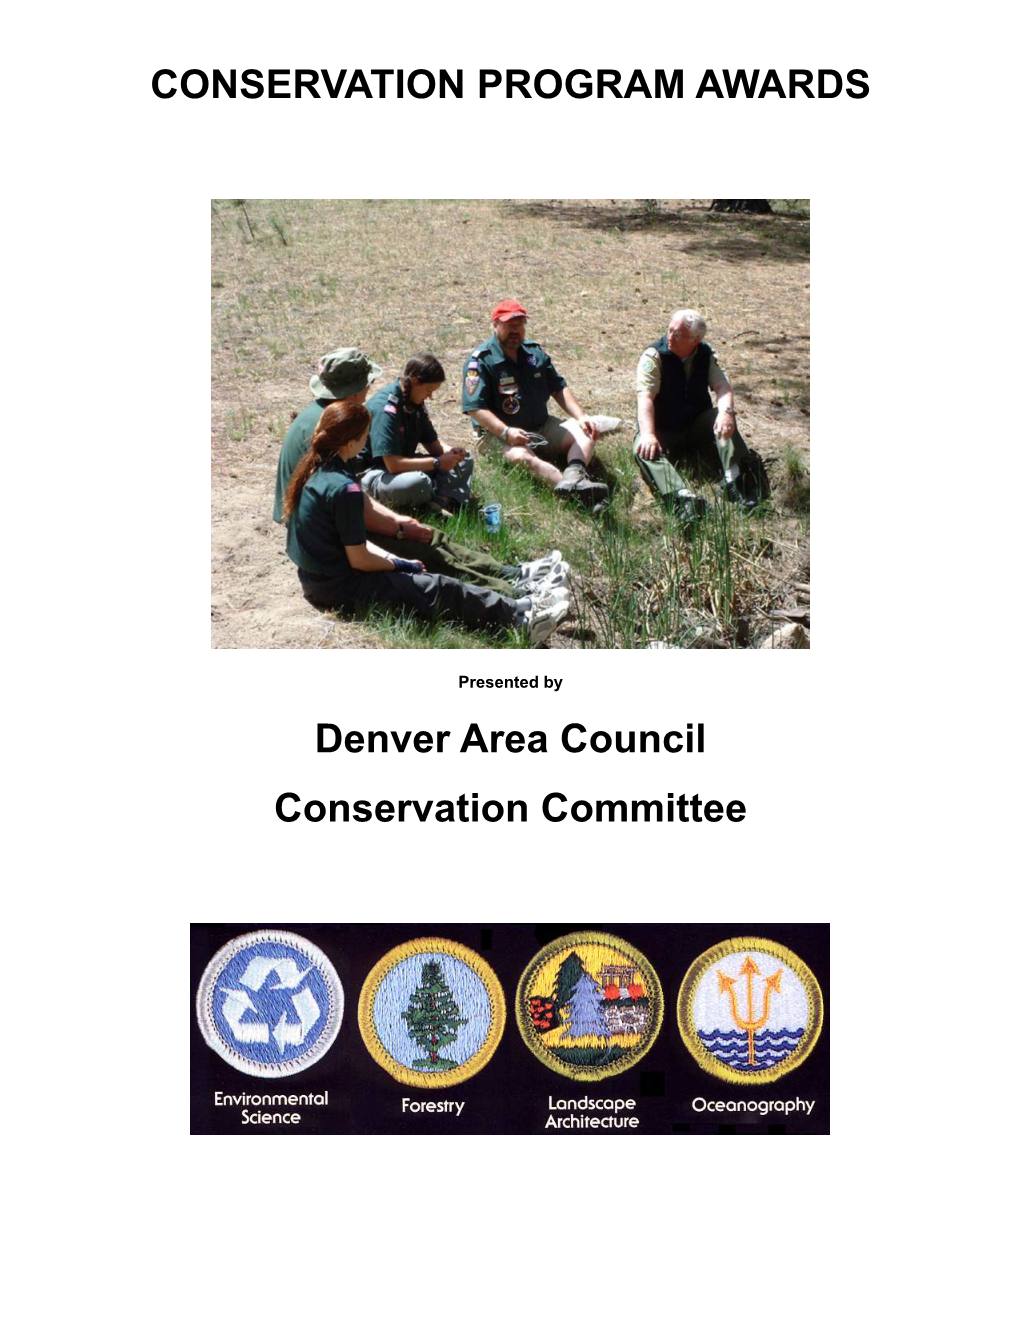 CONSERVATION PROGRAM AWARDS Denver Area Council Conservation Committee